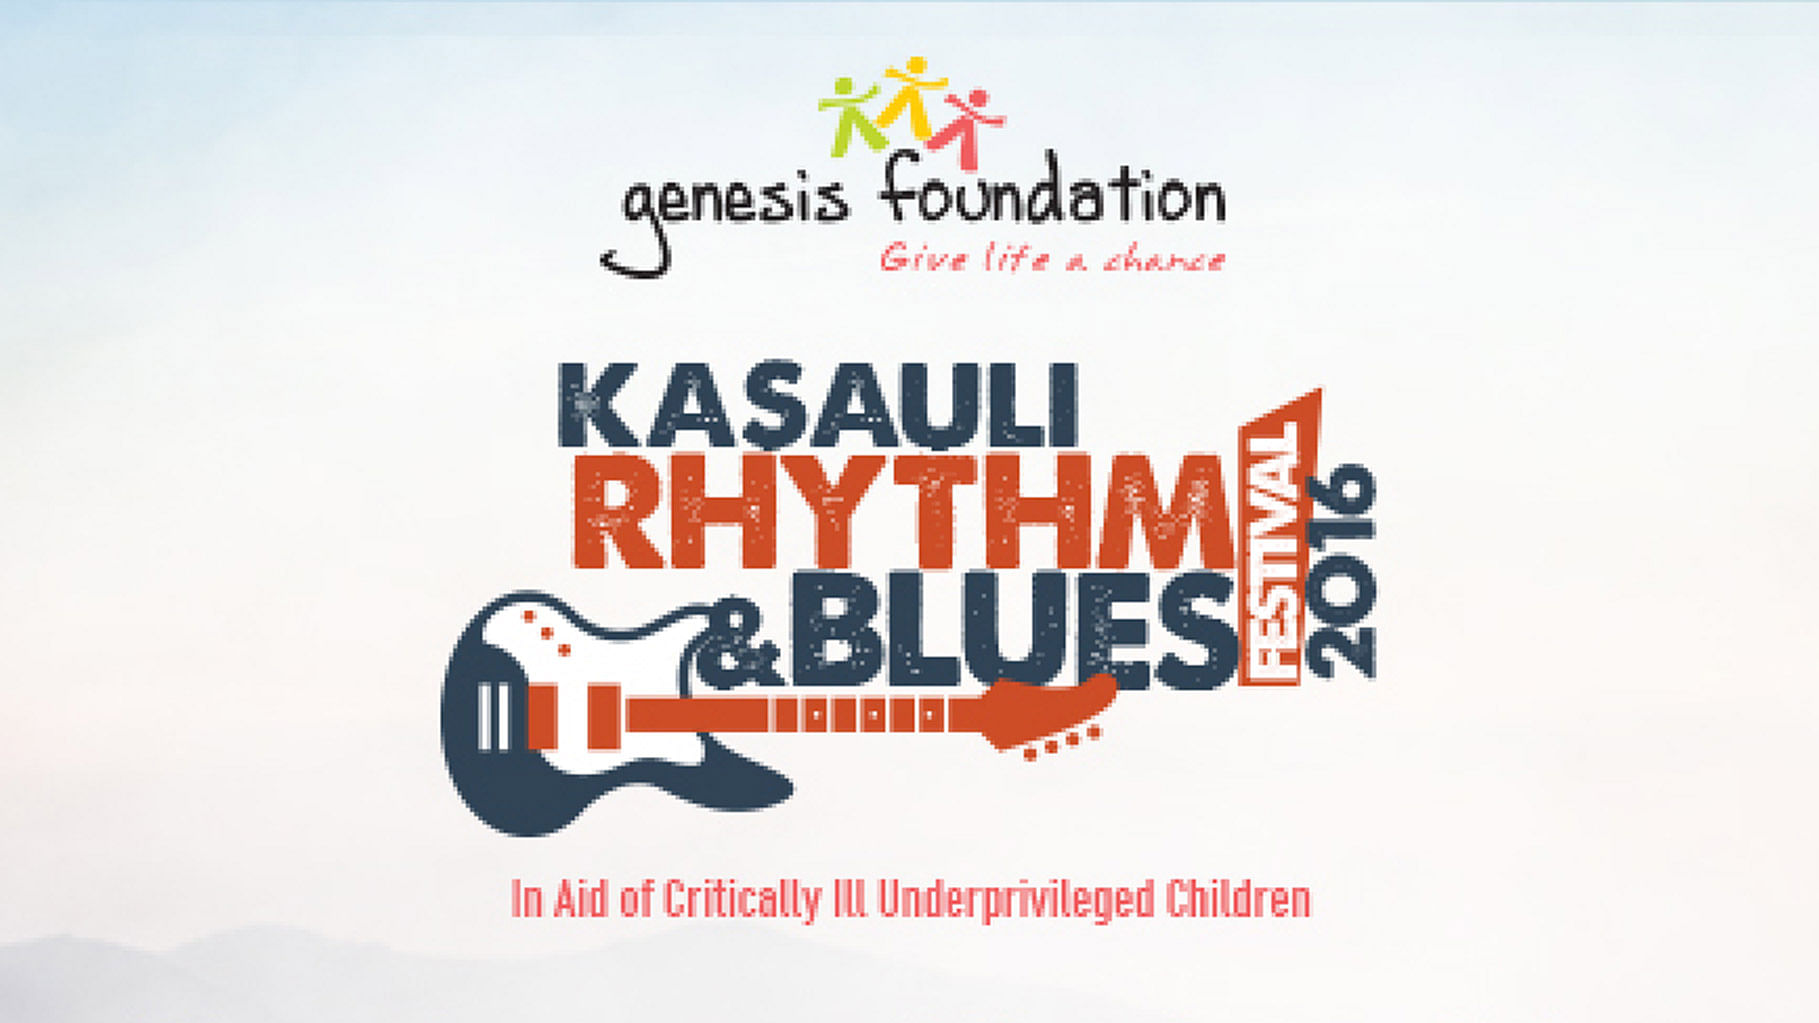 Eight bands will perform over  two days at the Kasauli RnB music festival. (Photo Courtesy: Genesis Foundation)